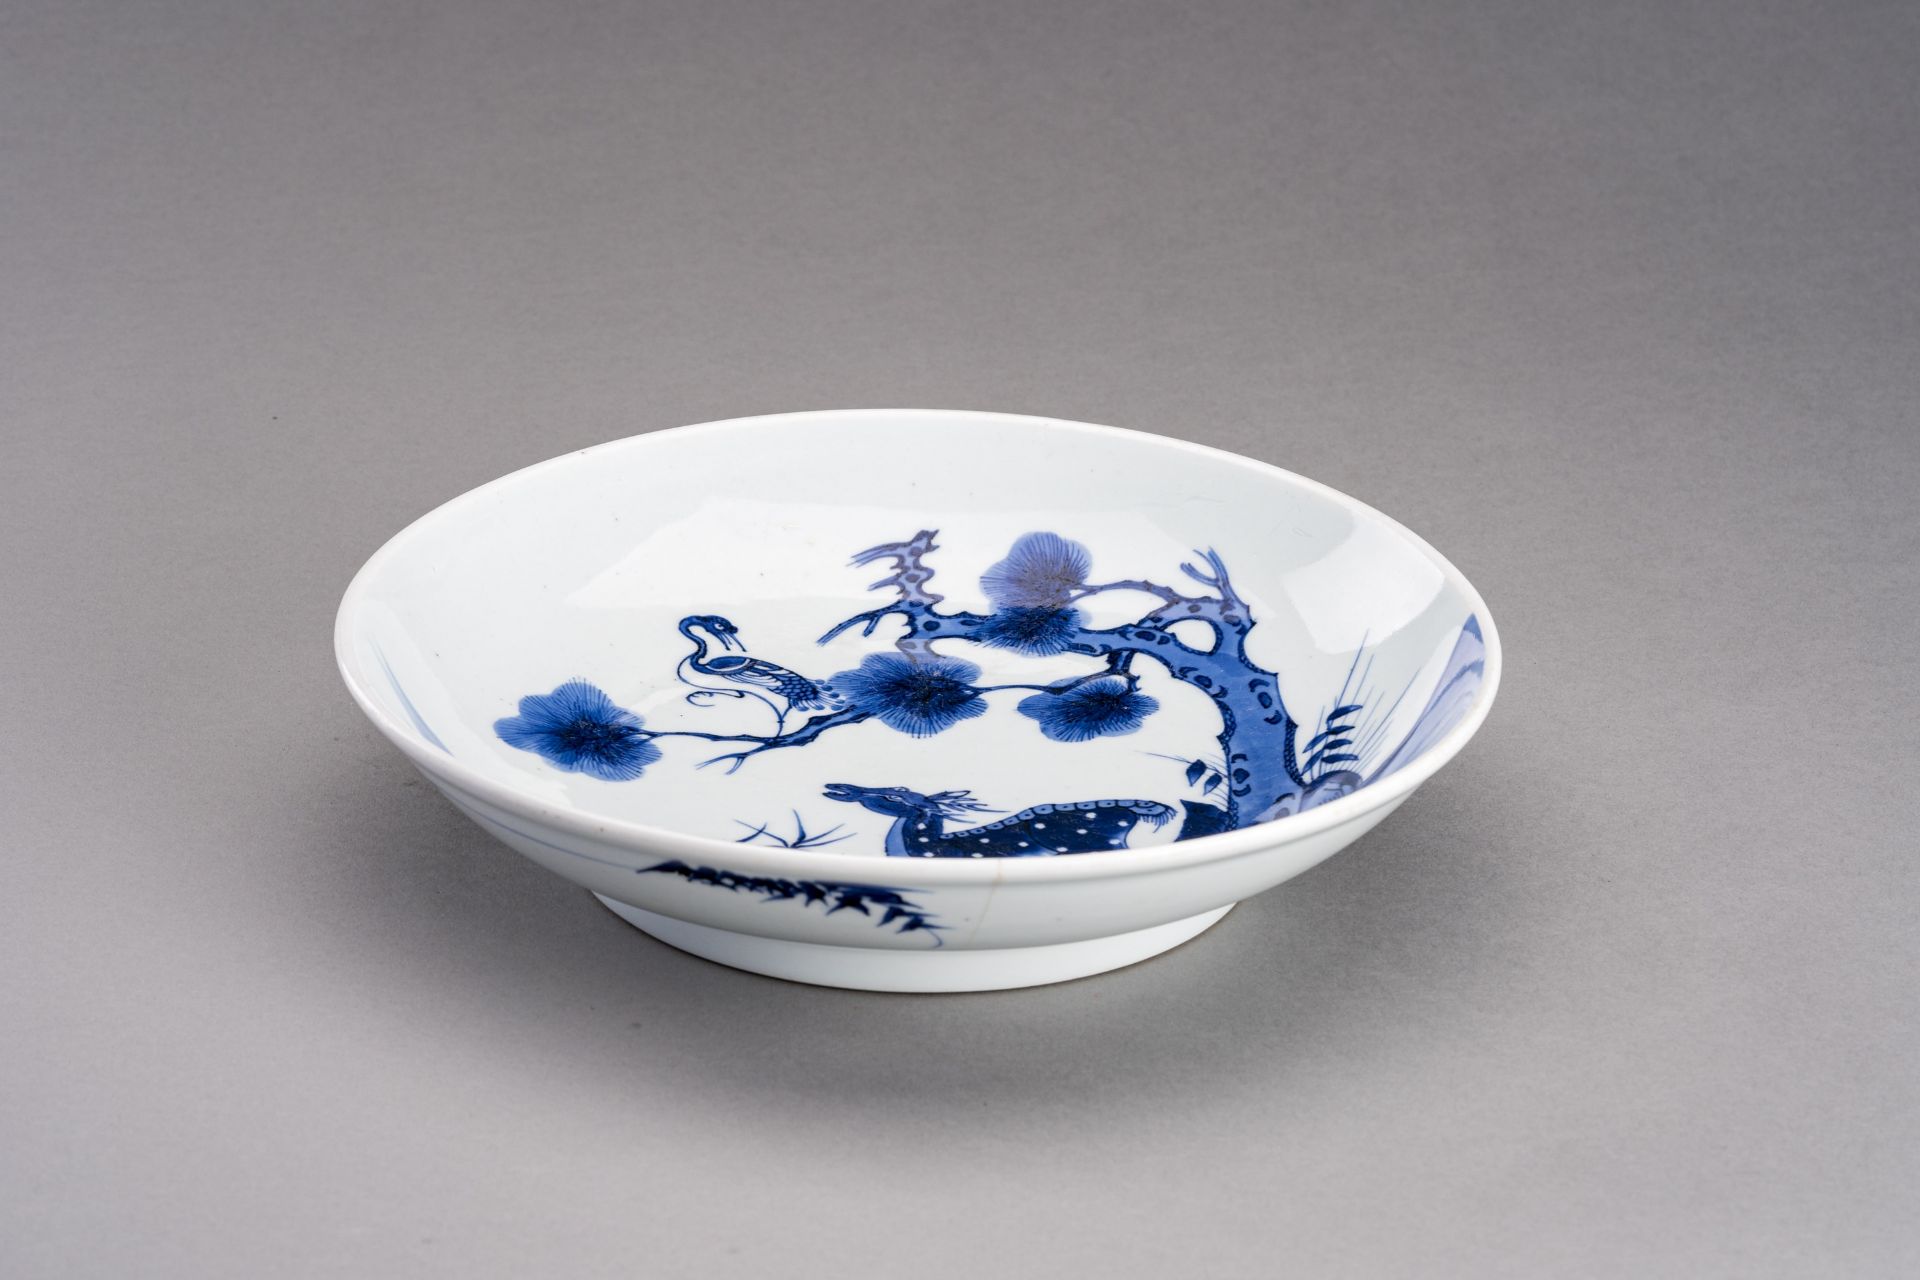 A BLUE AND WHITE 'DEER AND CRANE' PORCELAIN DISH, QING DYNASTY - Image 3 of 7